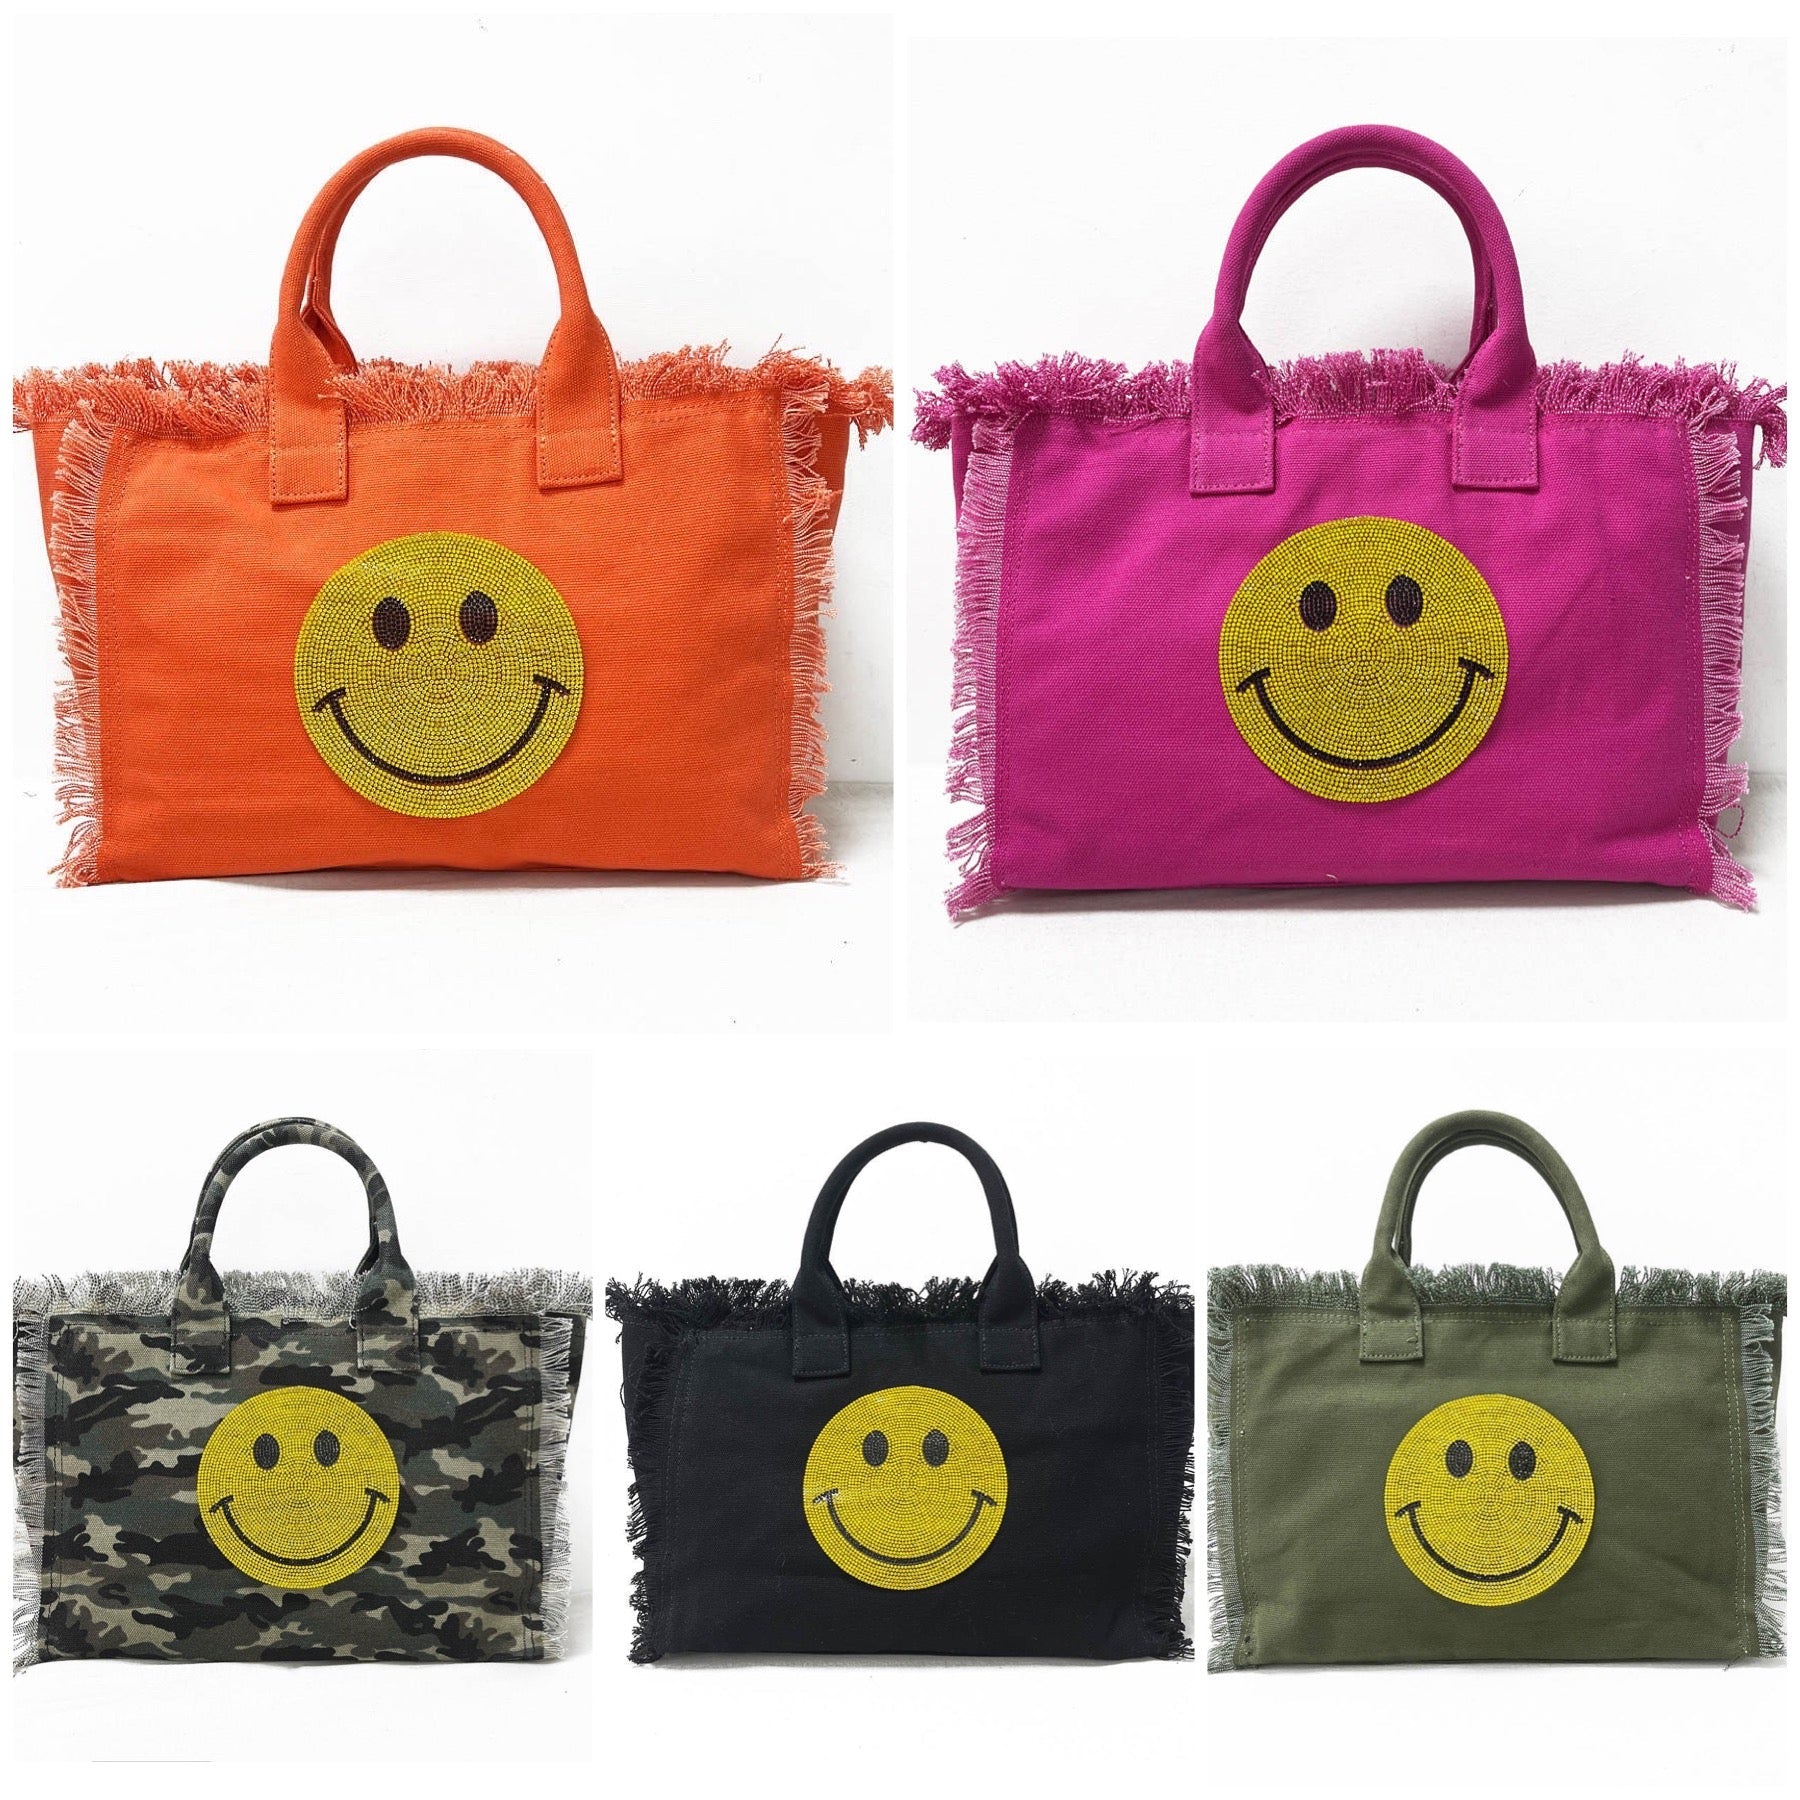 Smiley Face Shopping Bags, 12.5 microns, 11.5